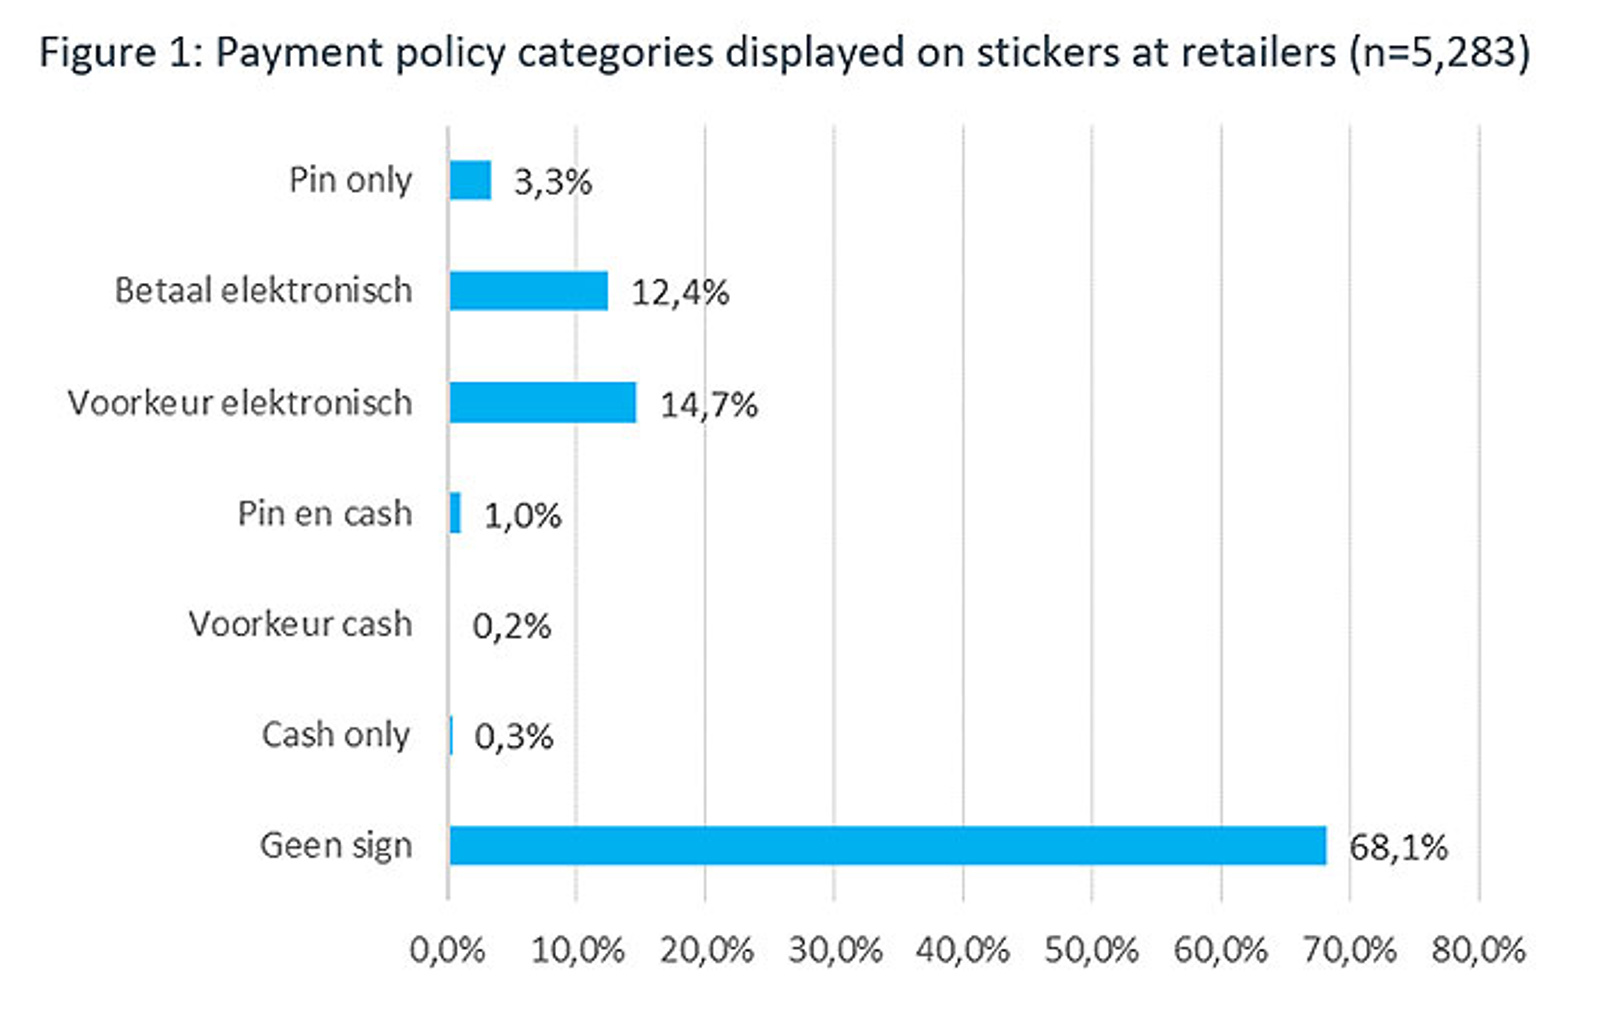 Payment policy categories displayed on stickers at retailers (n=5,283)